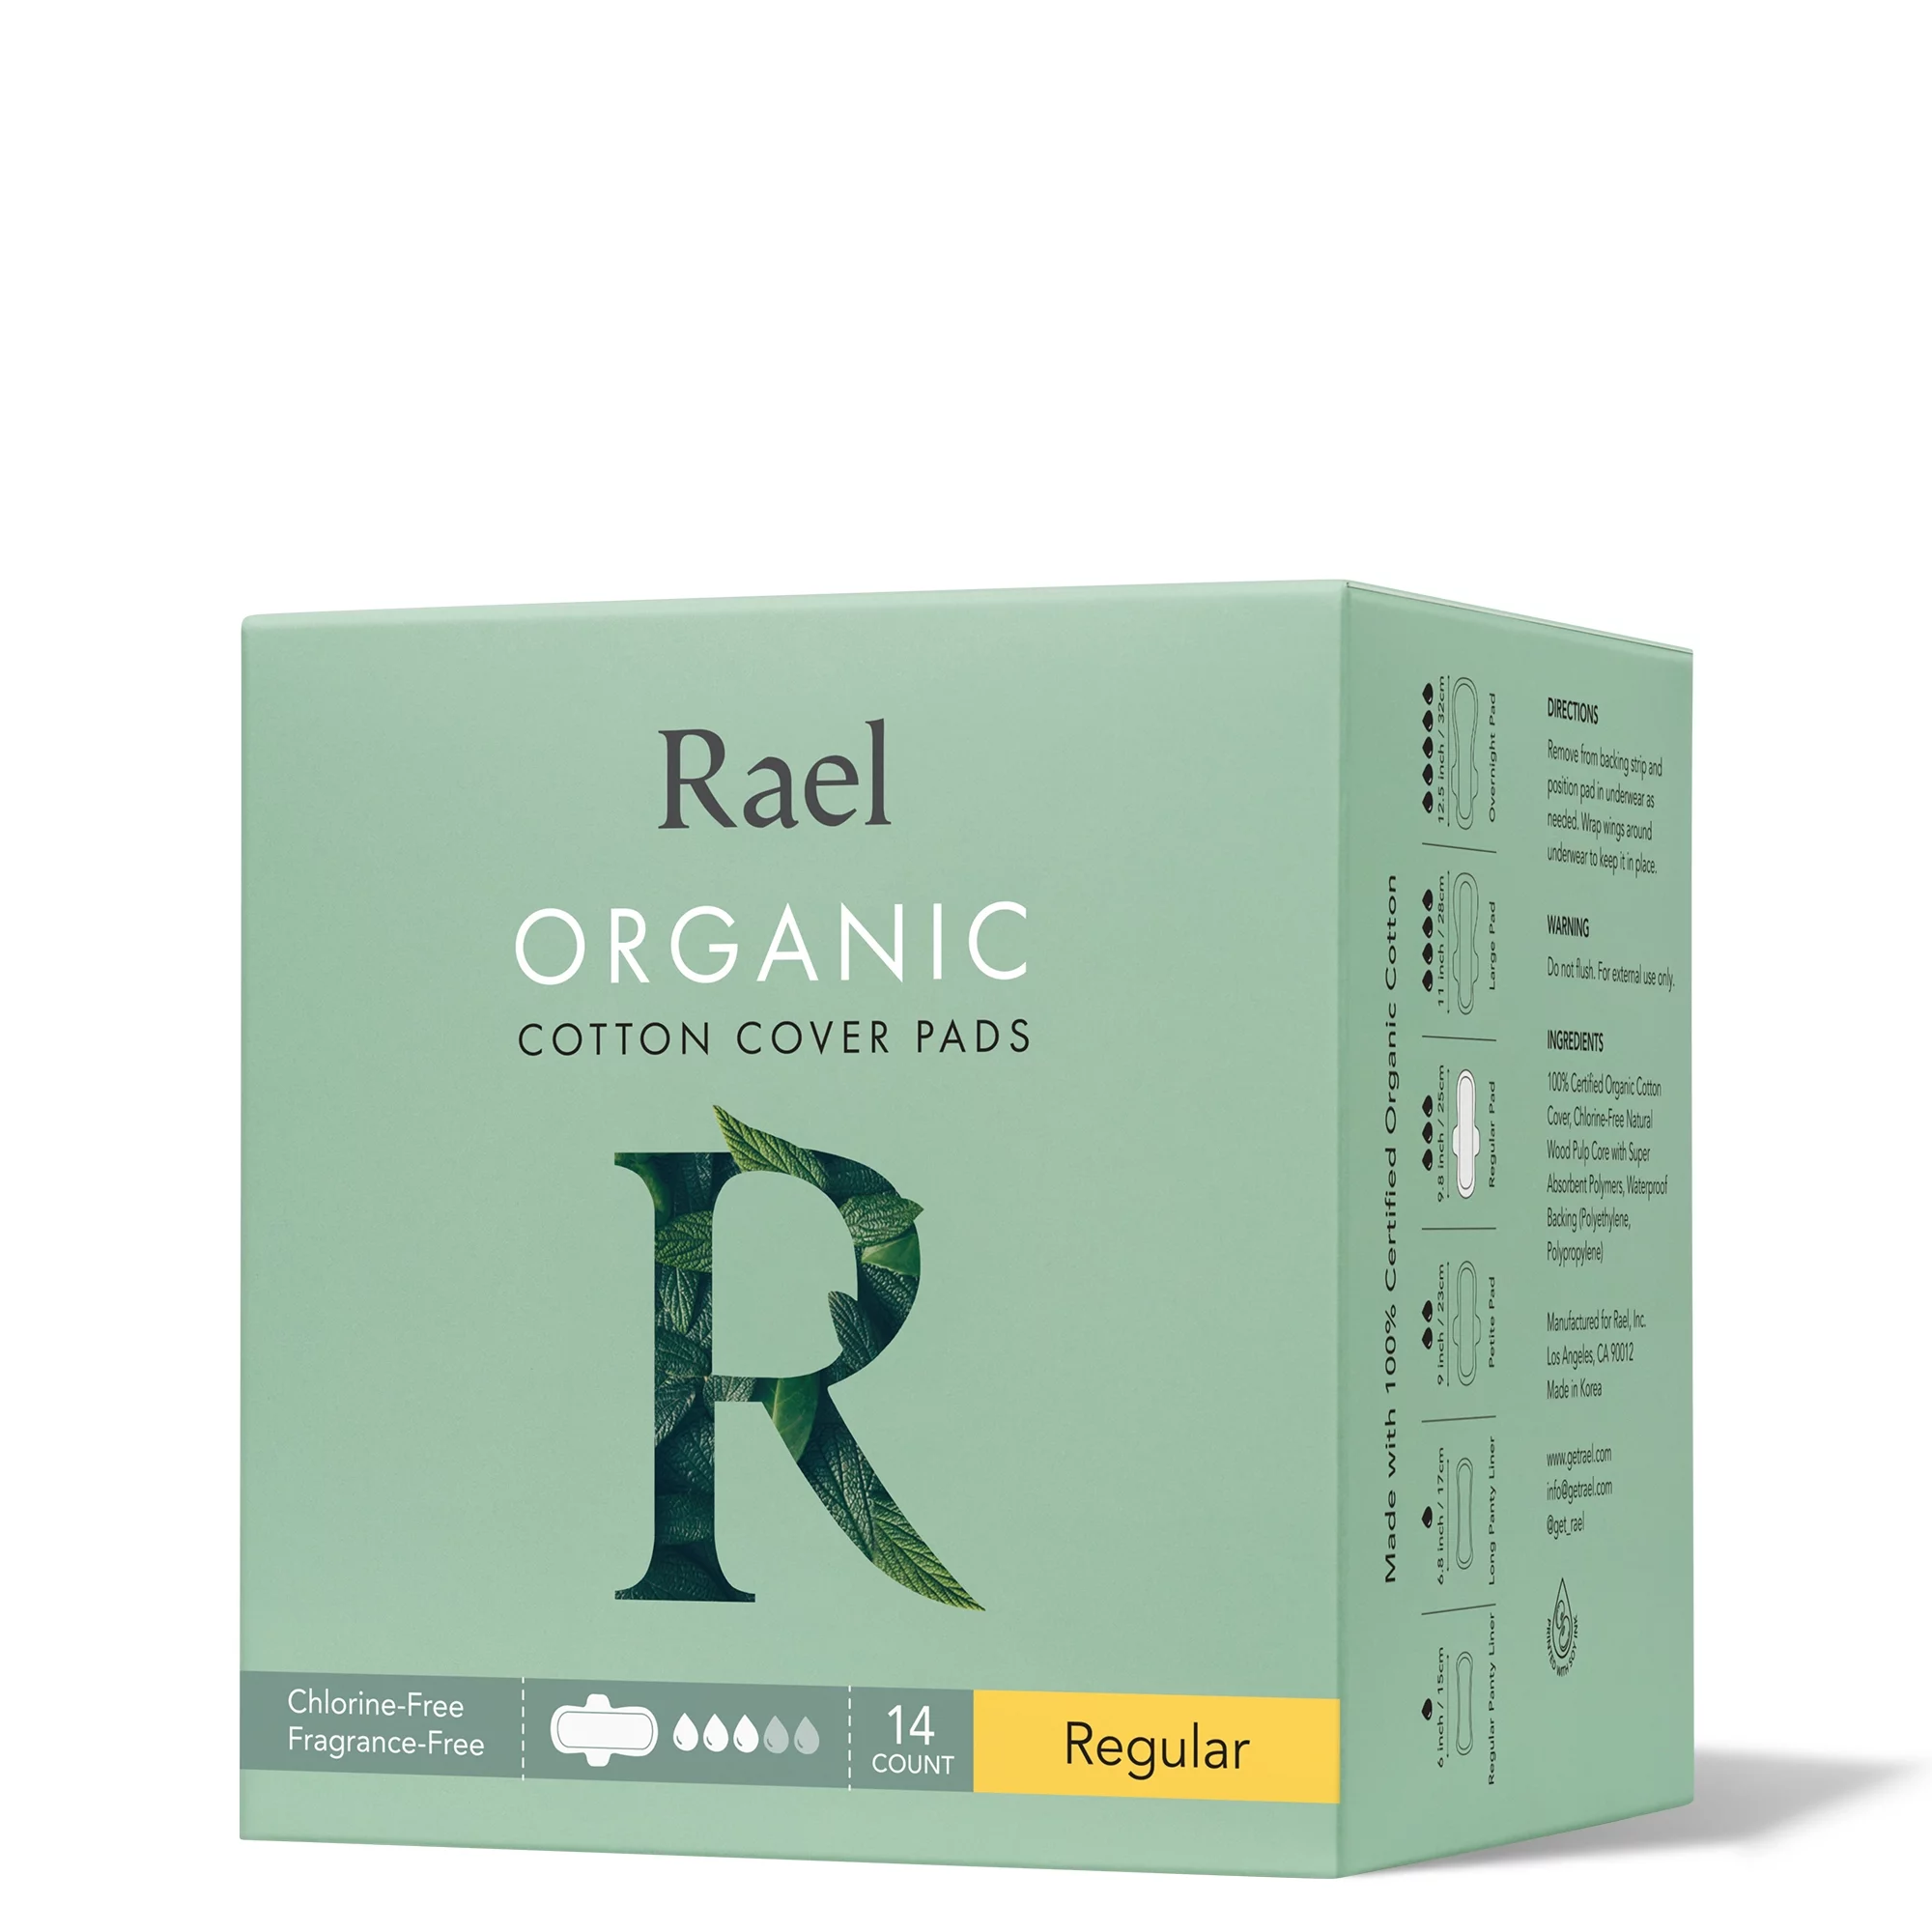 Rael Organic Cotton Cover Menstrual Regular Pads - Unscented, Chlorine Free, Natural Sanitary Napkins with Wings, 14 Count